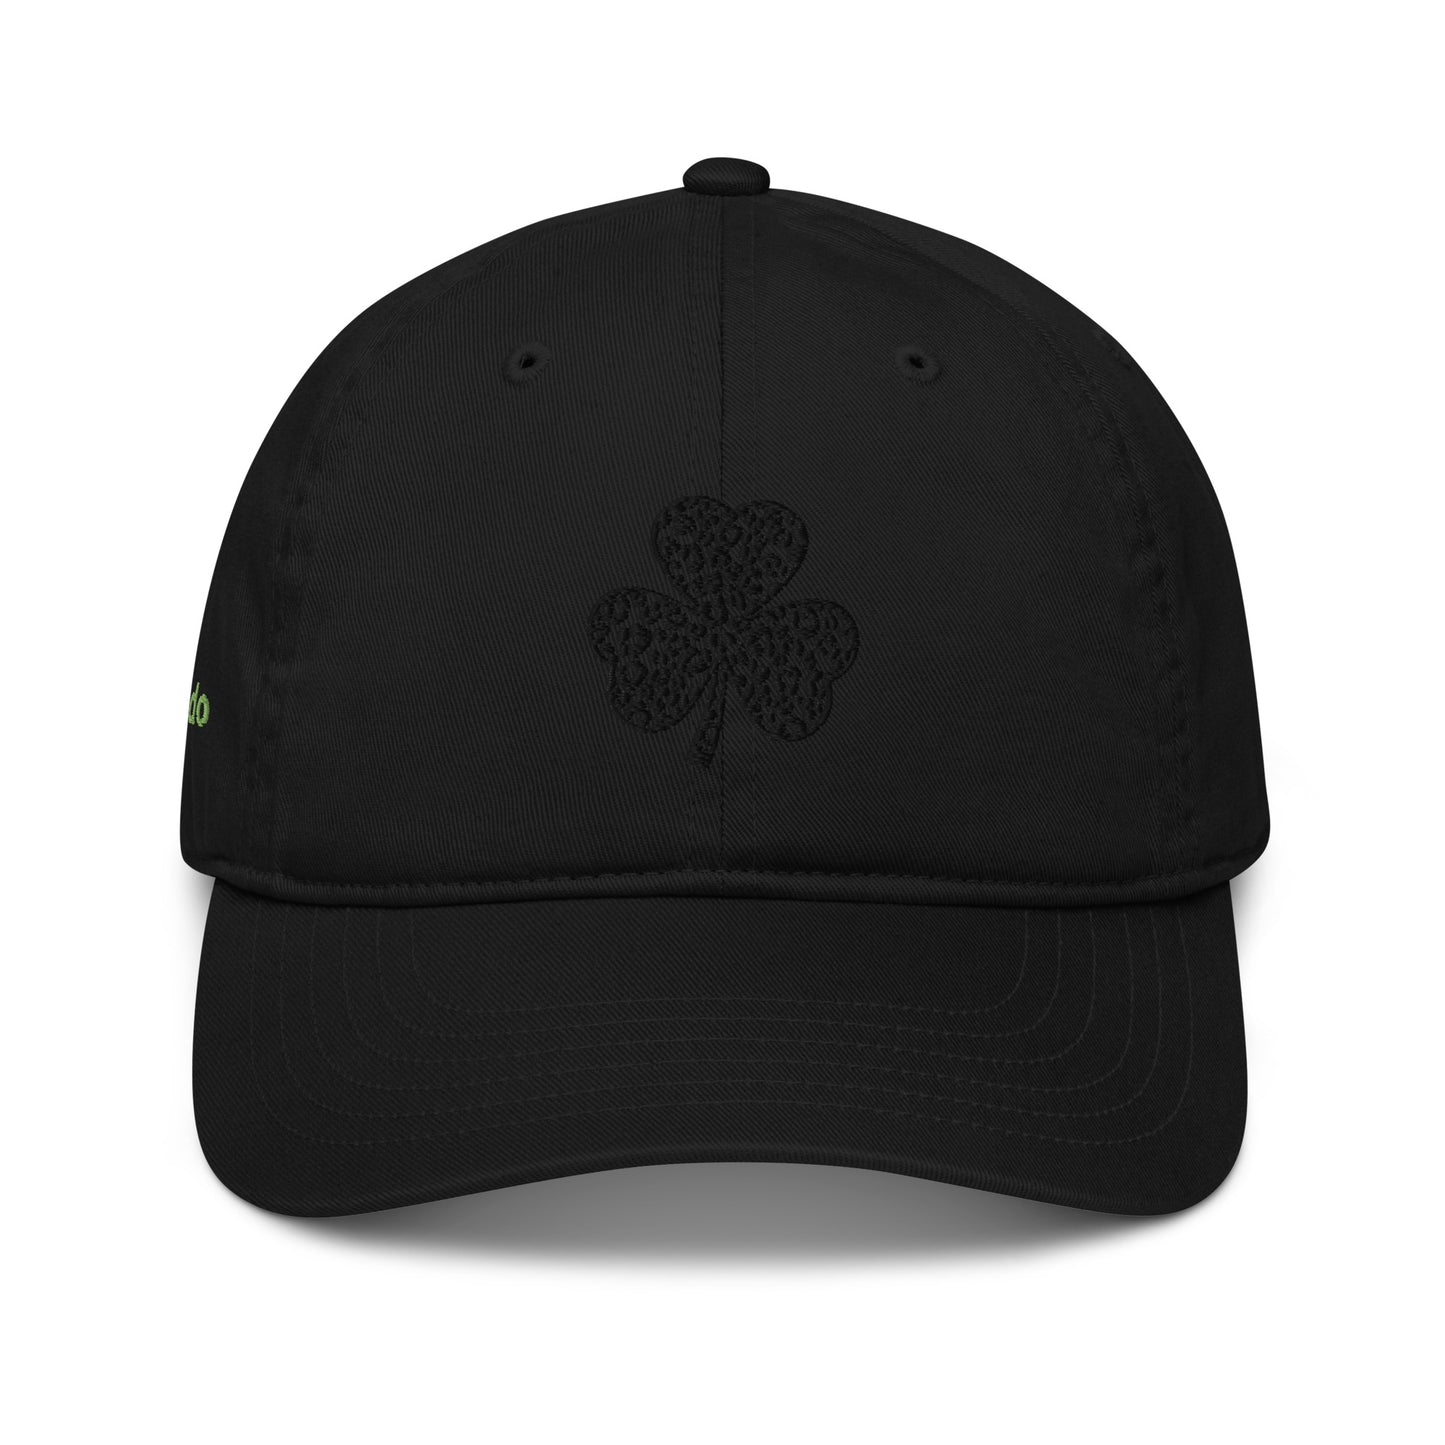 Organic dad hat - Embroidered Black Clover